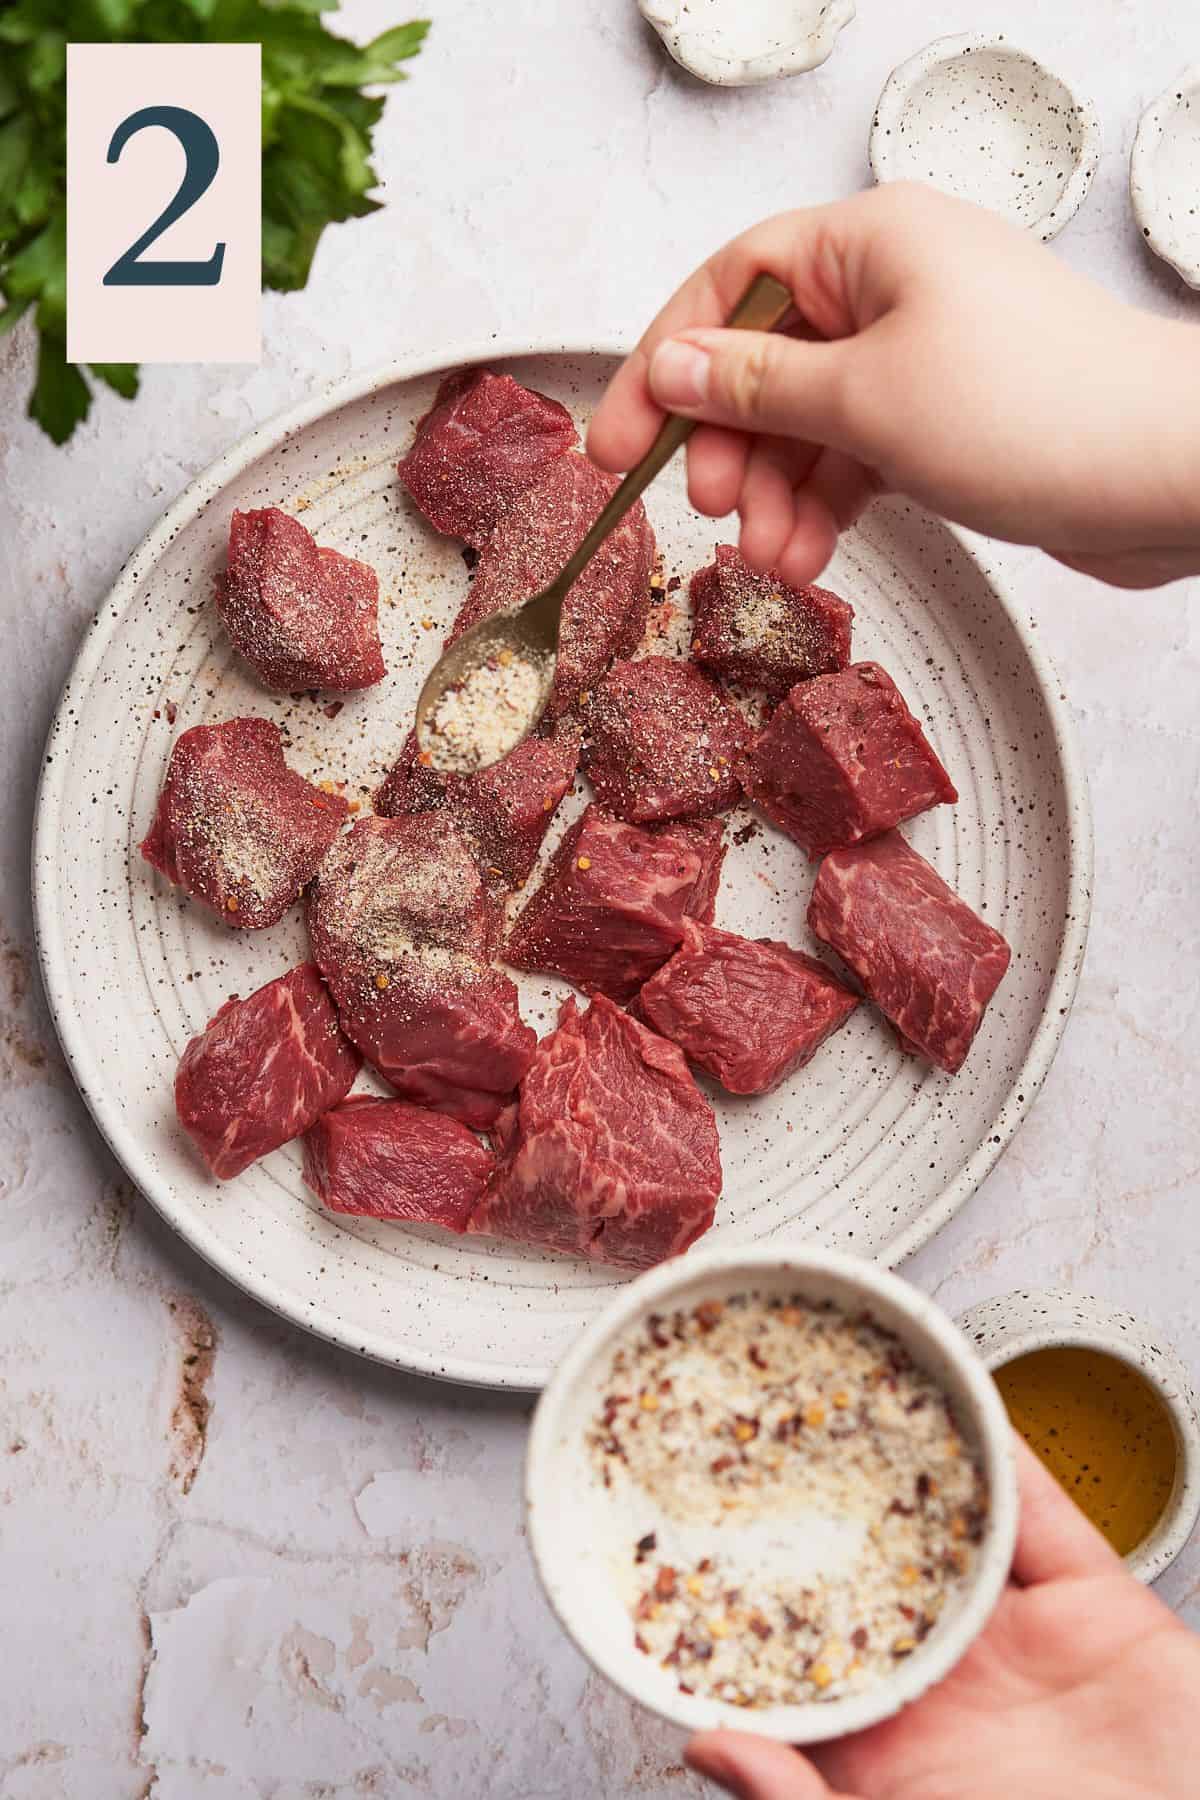 seasoning steak with spice blends evenly with a spoon.